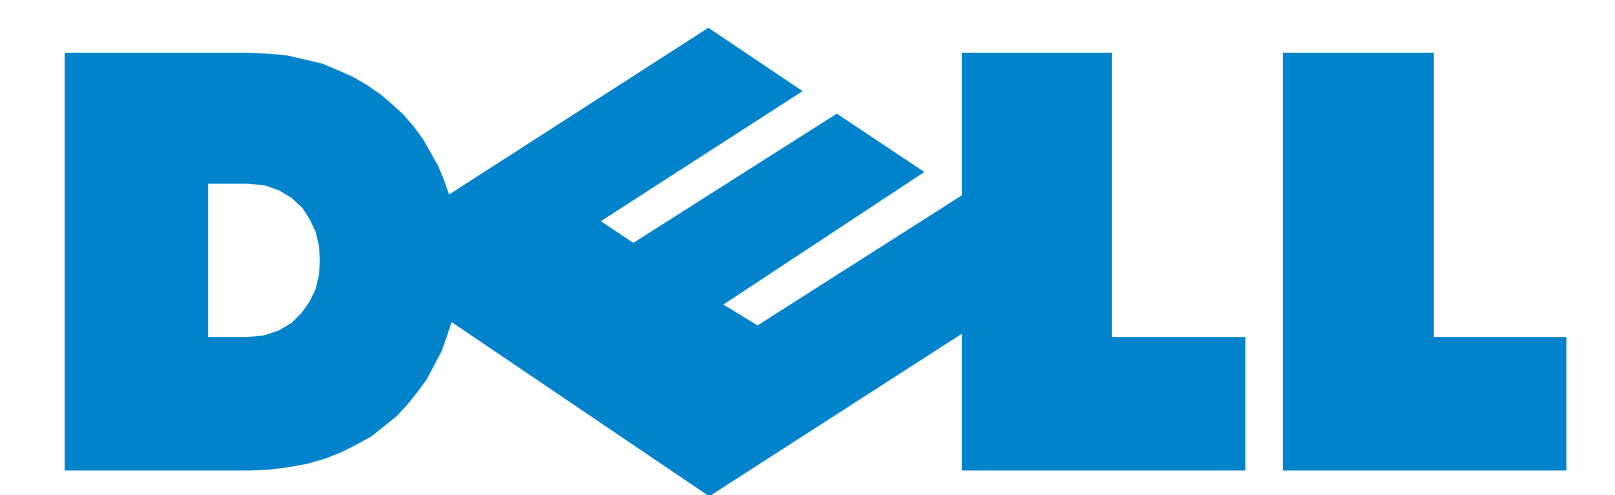 dell-logo-png.png